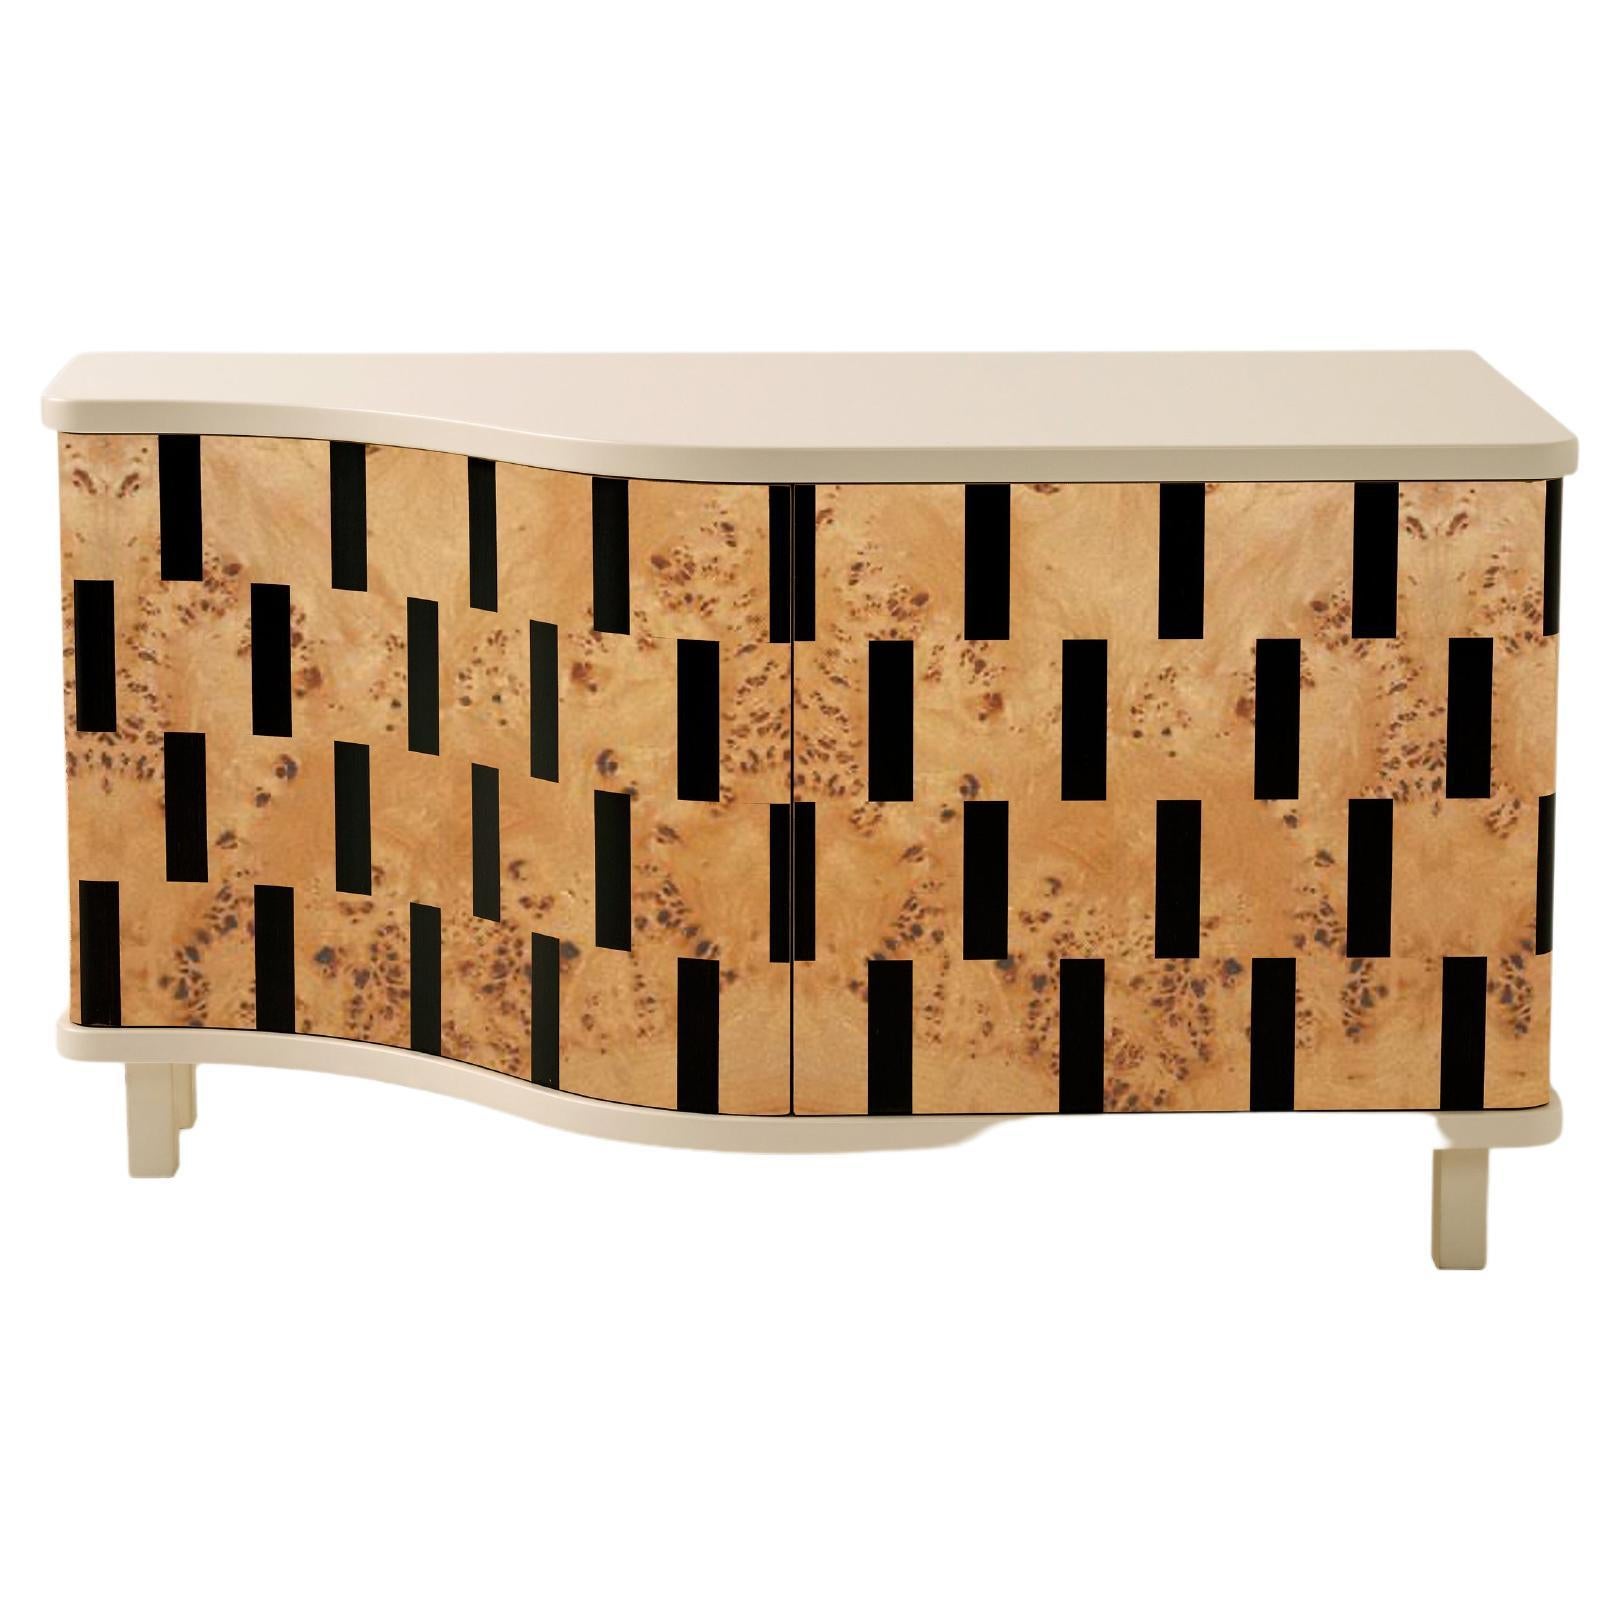 Rayas Striped Credenza with Light Burl Wood Marquetry